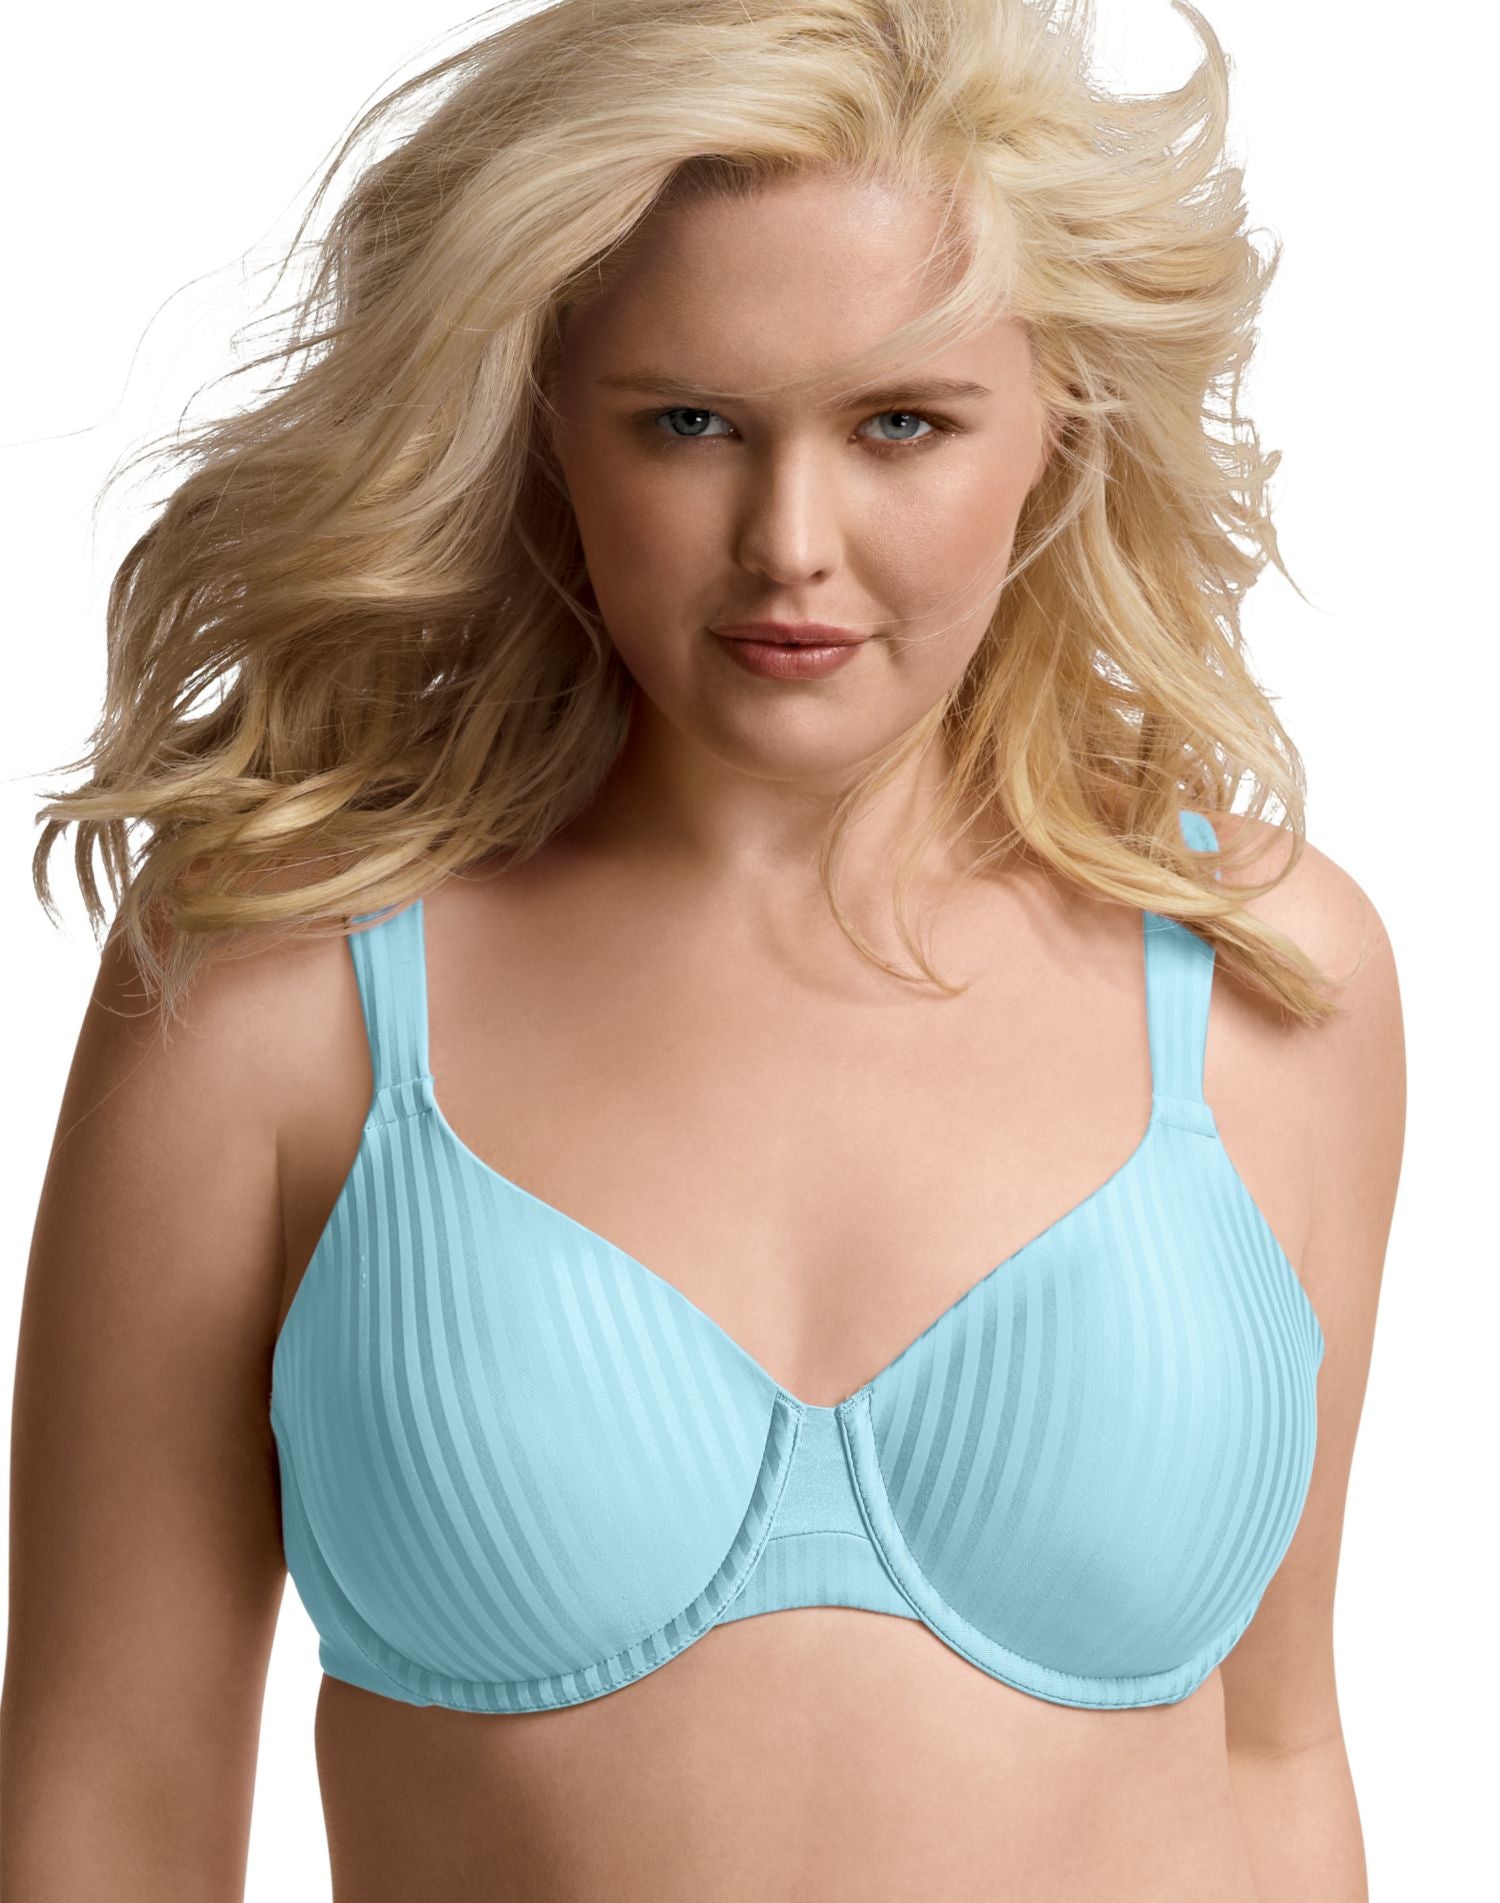 asntrgd Deals of The Day Bras Sale Cheap Bras Bras Clearance No